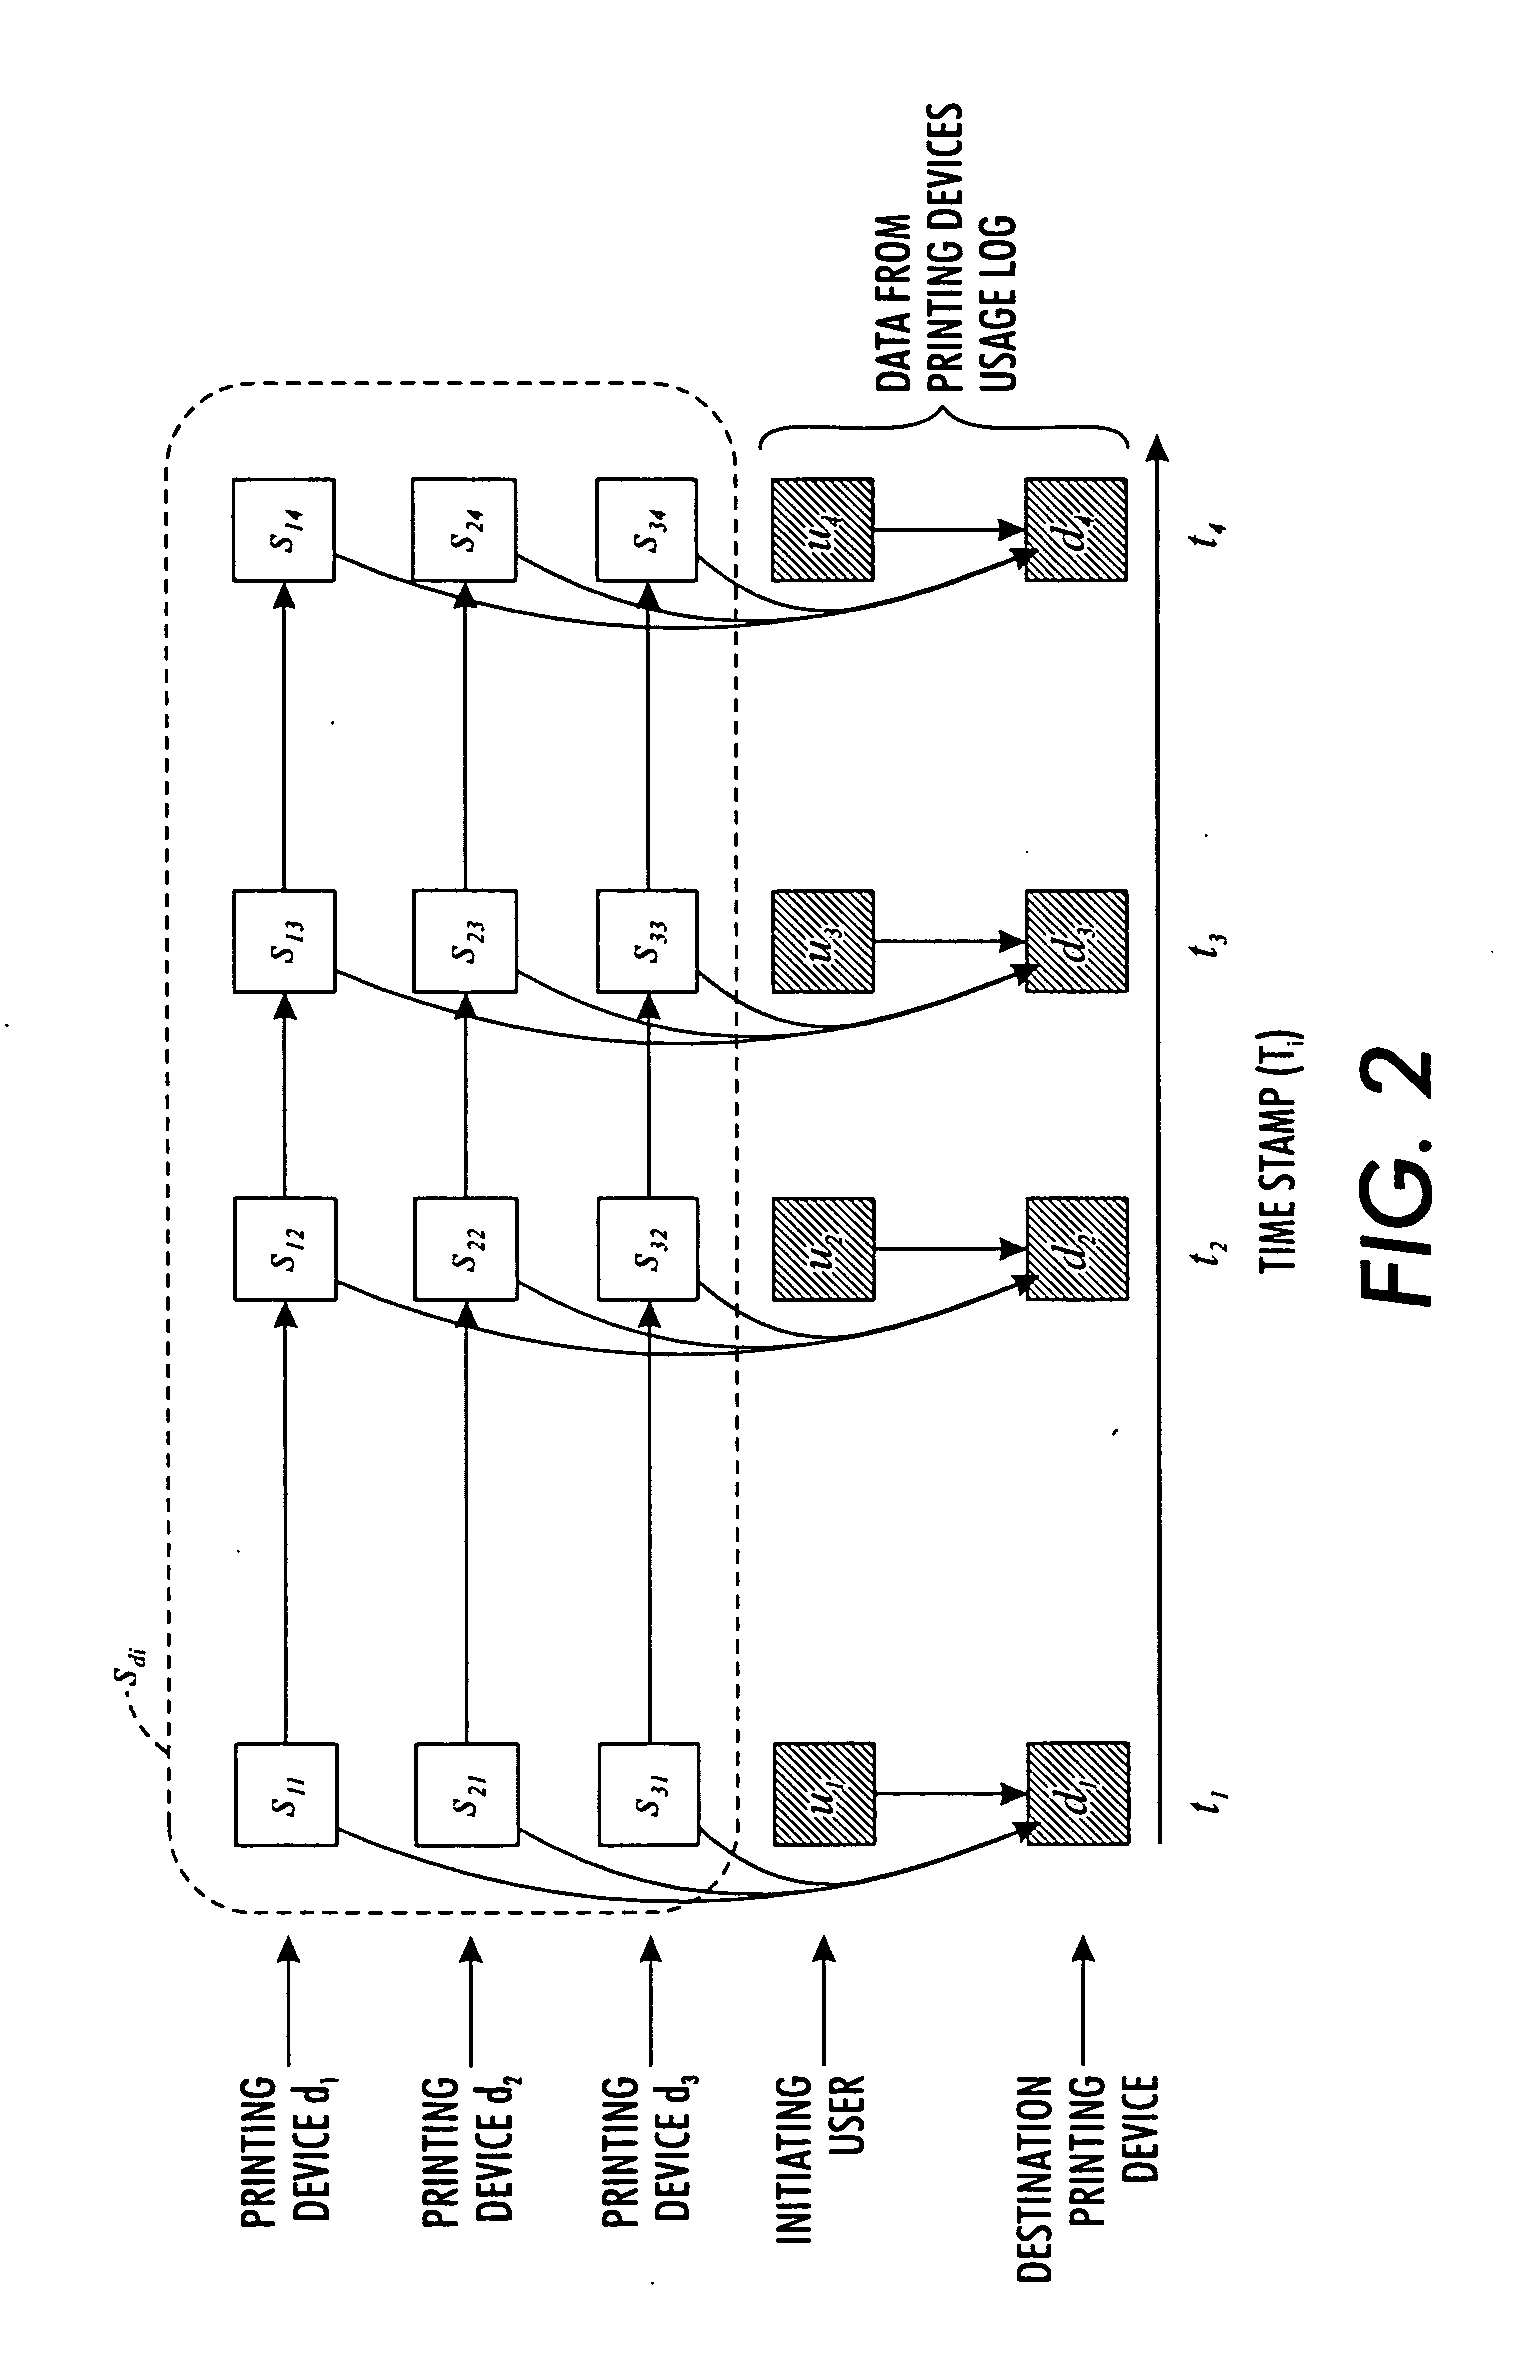 Soft failure detection in a network of devices